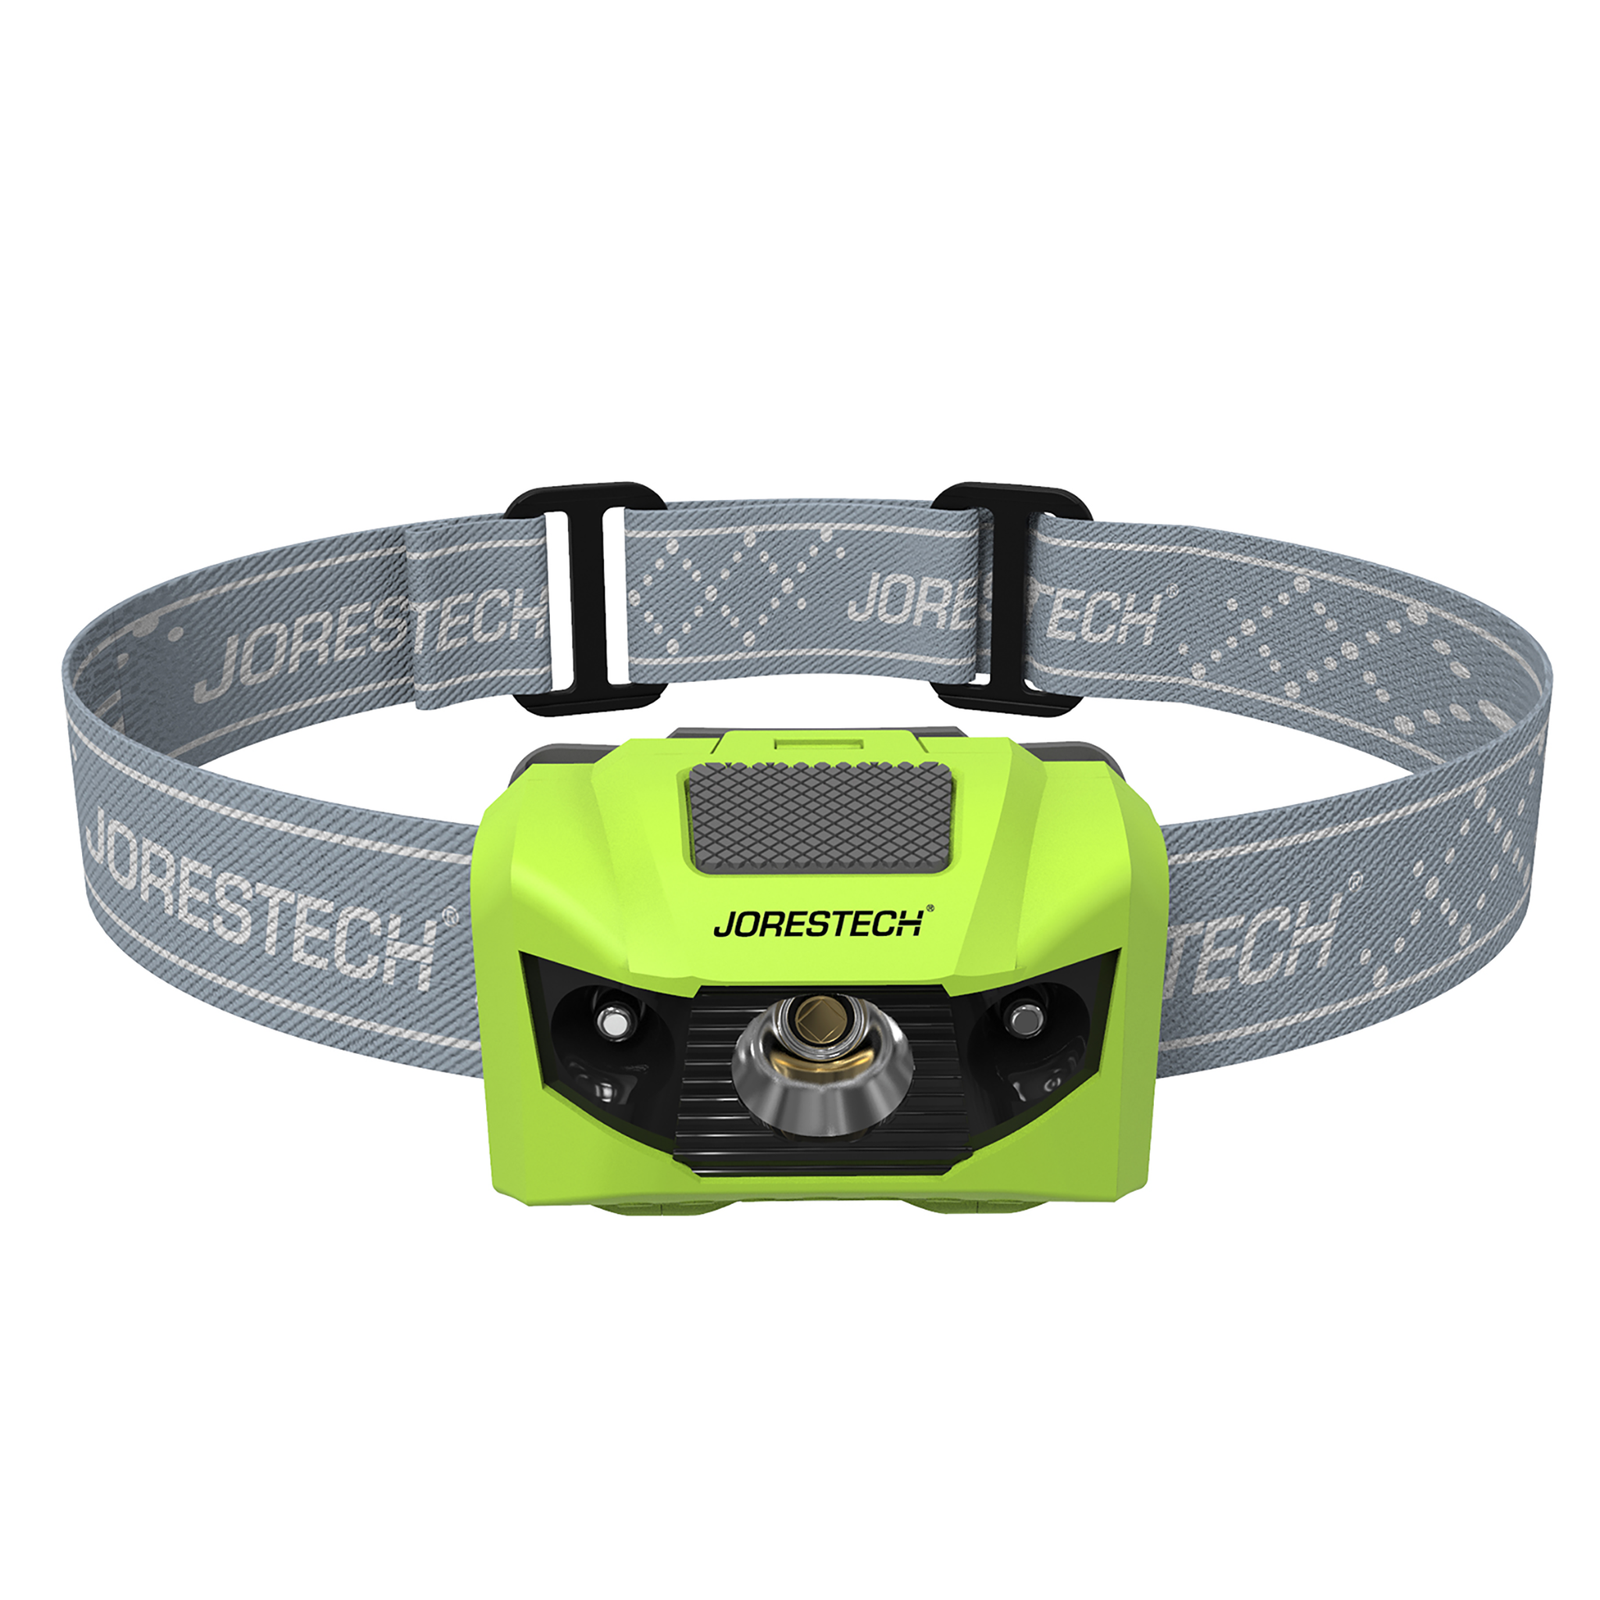 Lime JORESTECH led water resistant headlamp flashlight with a light gray adjustable elastic band